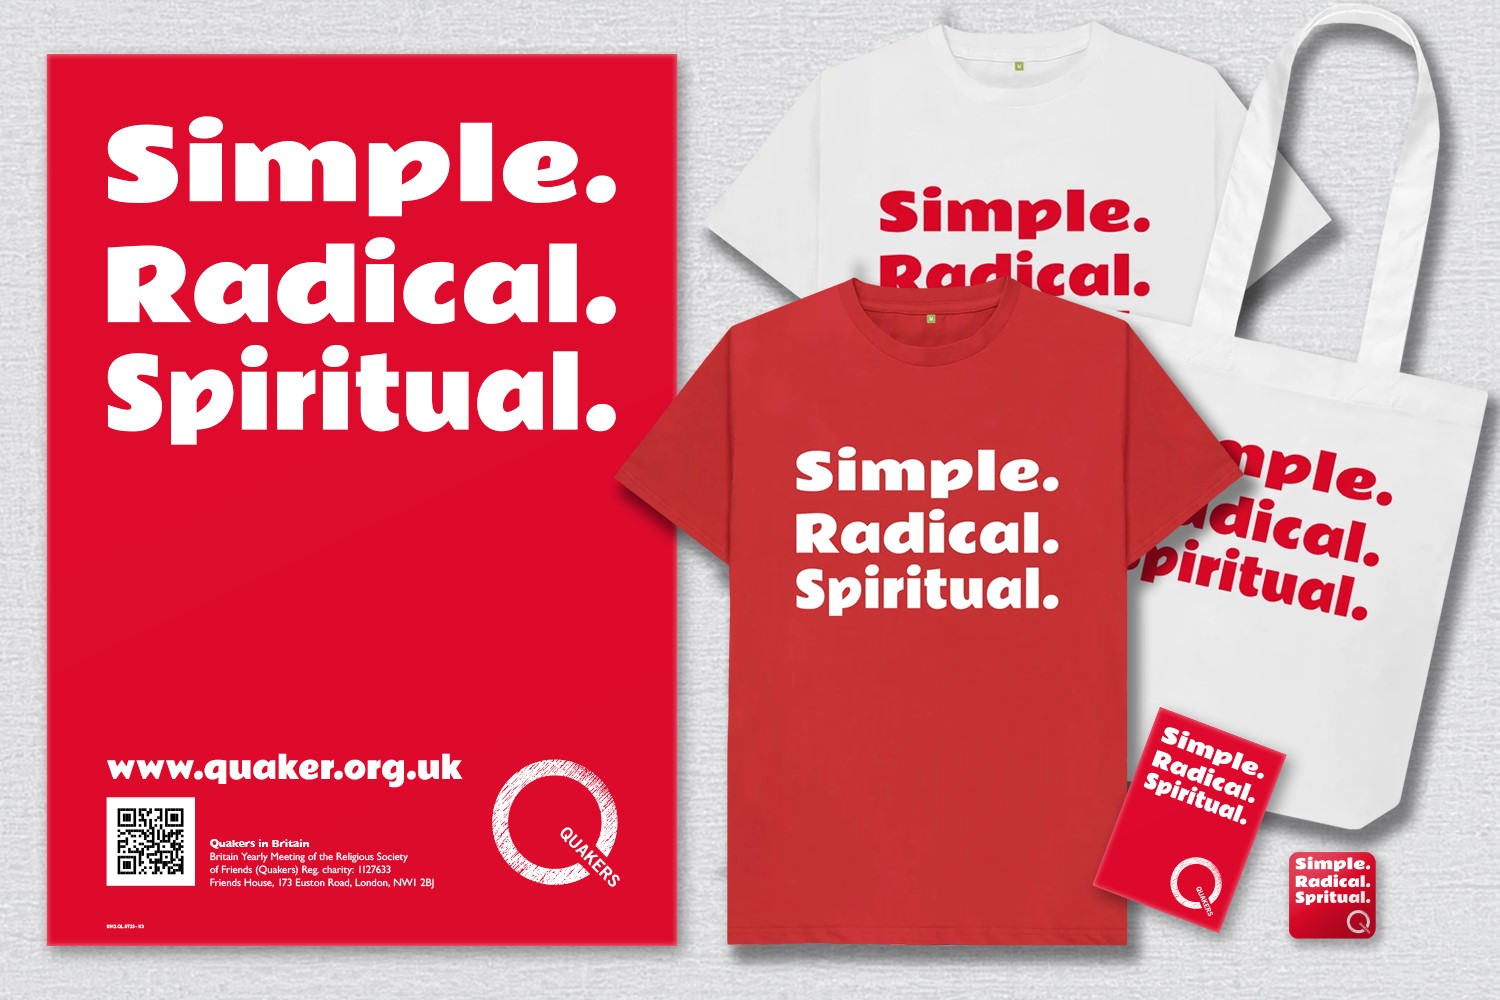 Quaker Week resources and merchandise